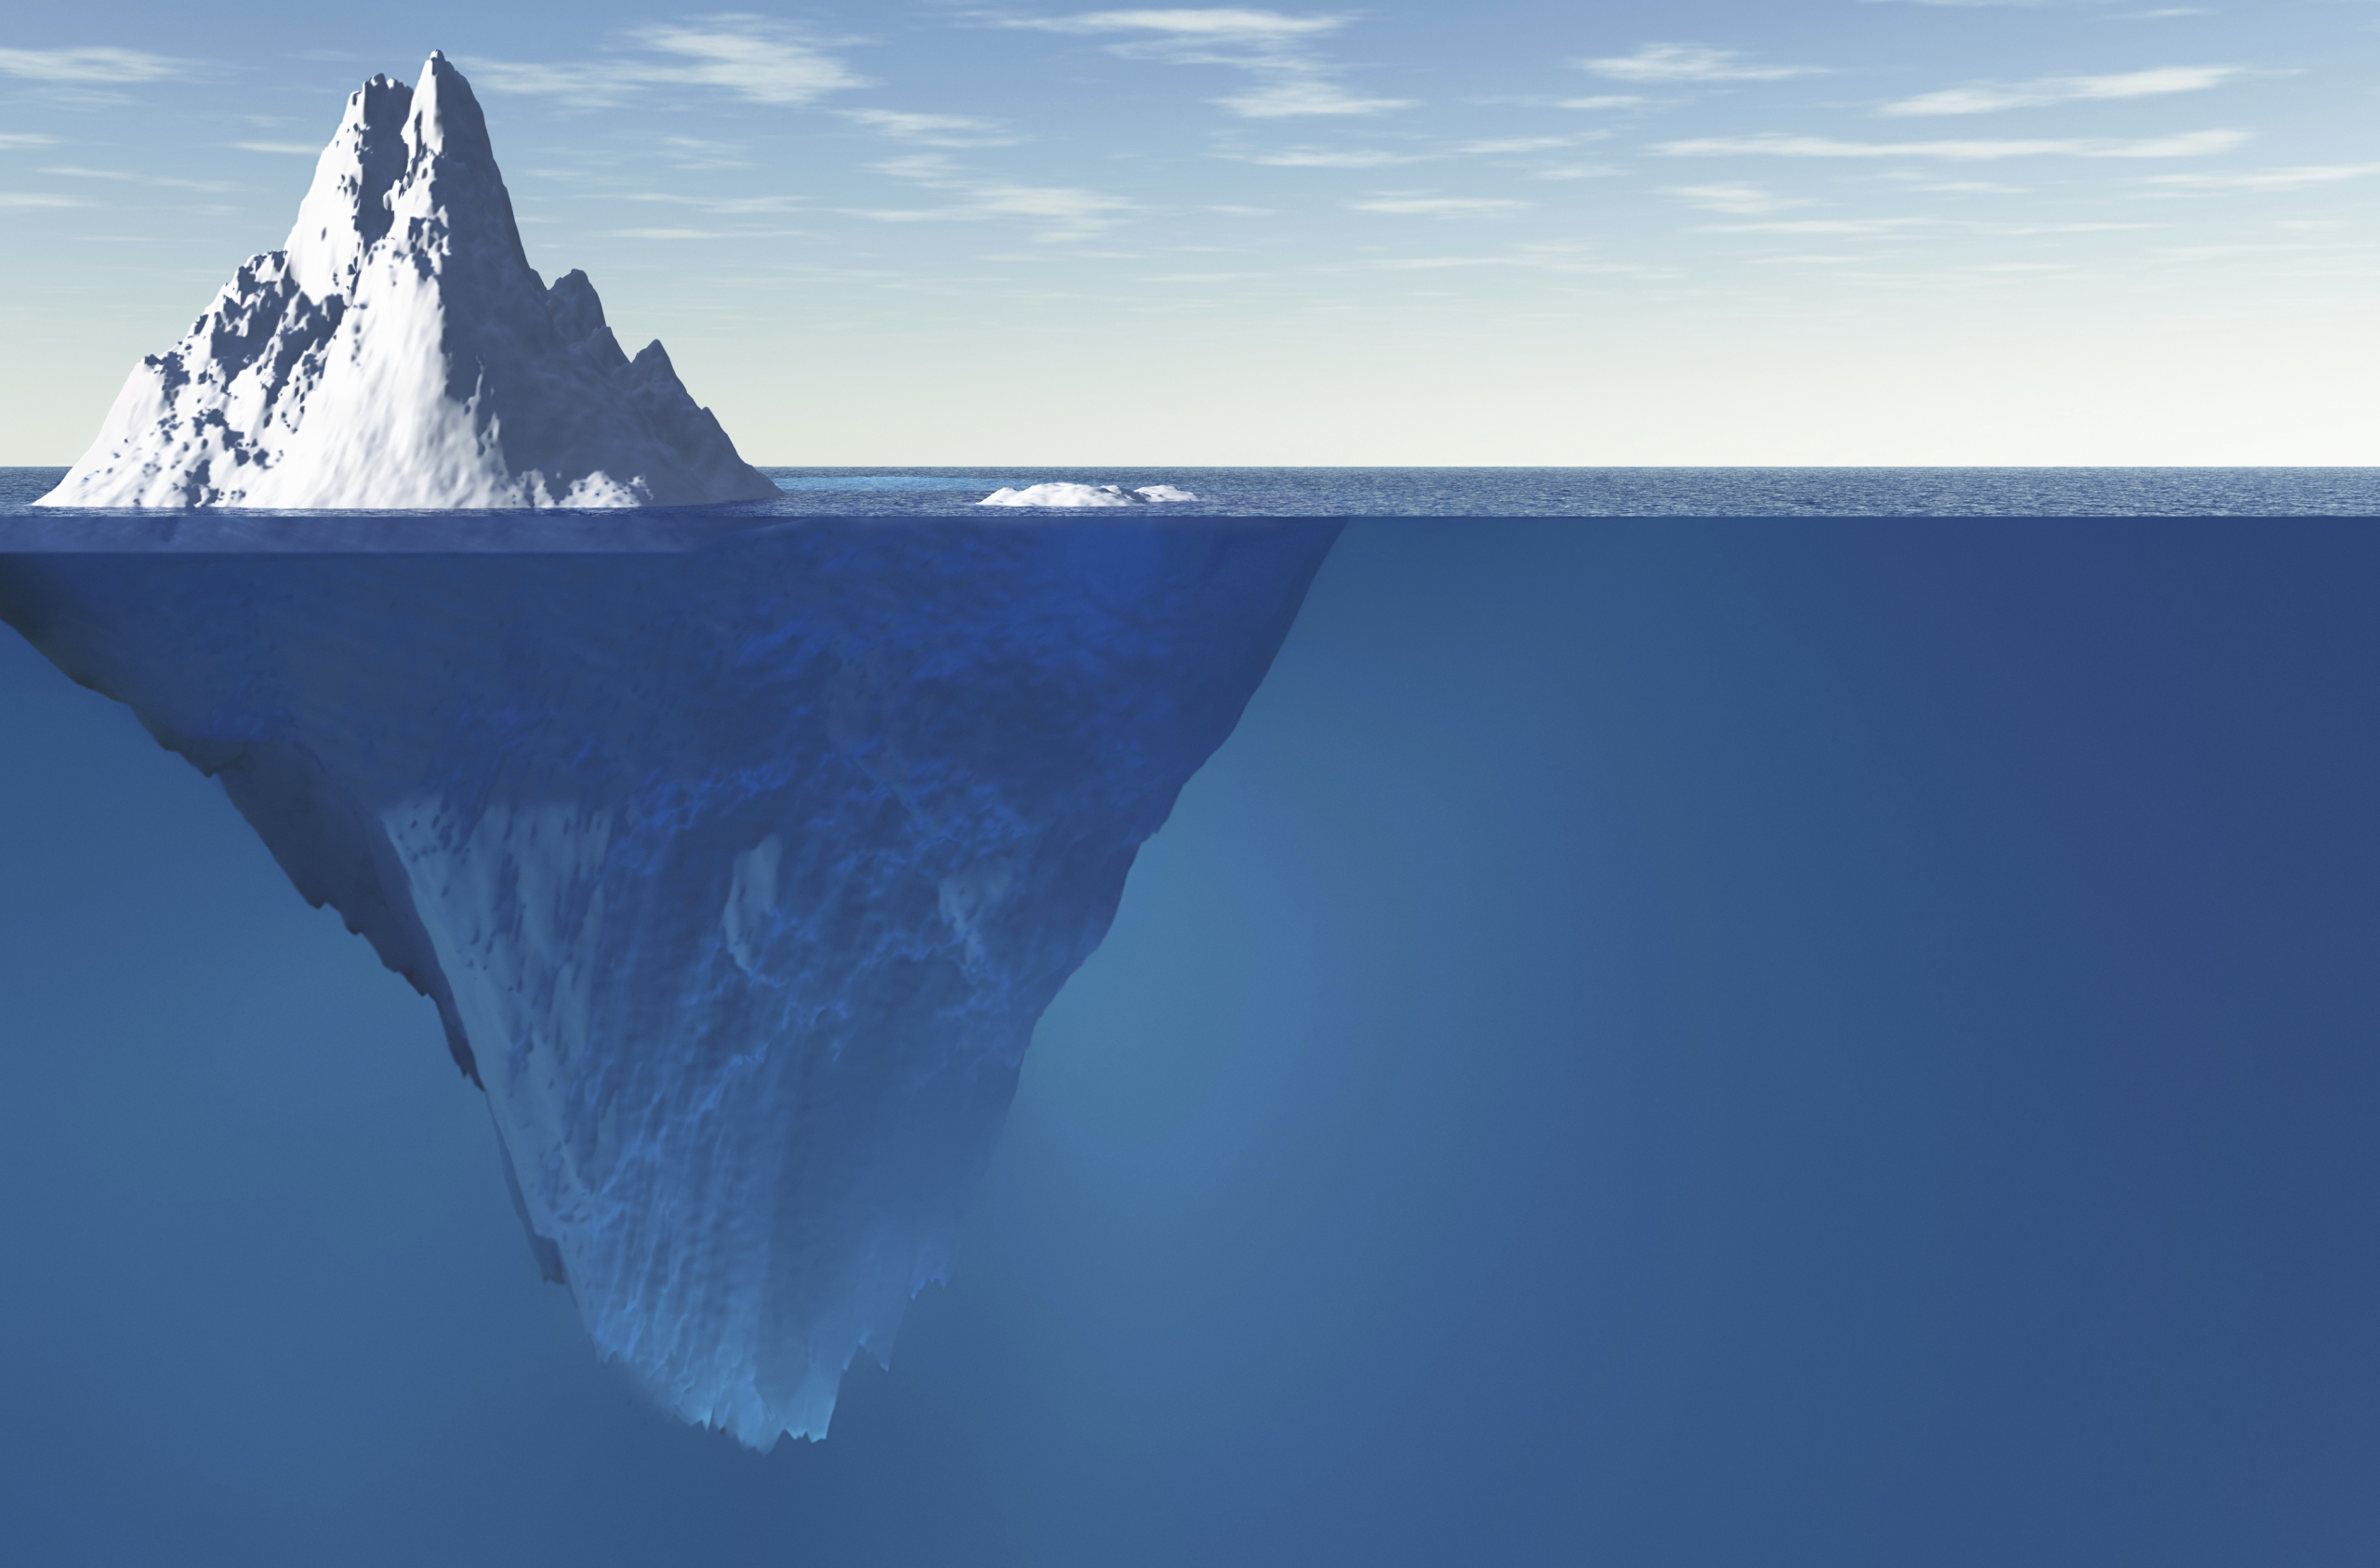 What can icebergs tell you about your mind? This metaphor helps explain